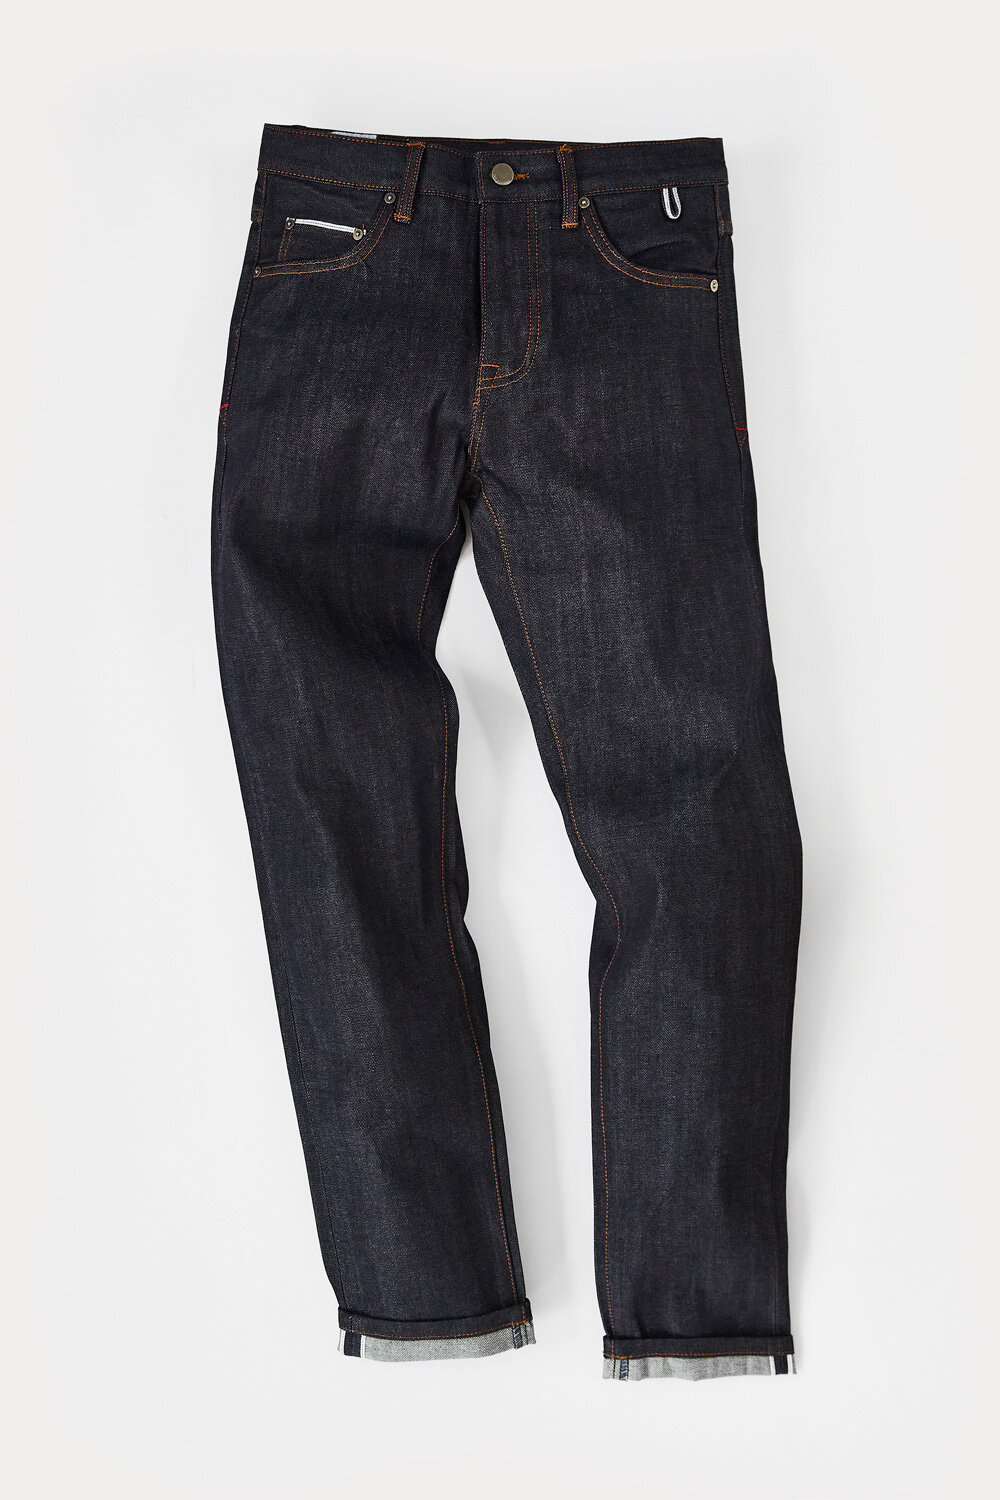 Japanese selvedge chino's and recycled selvedge denim jeans. — men's ...